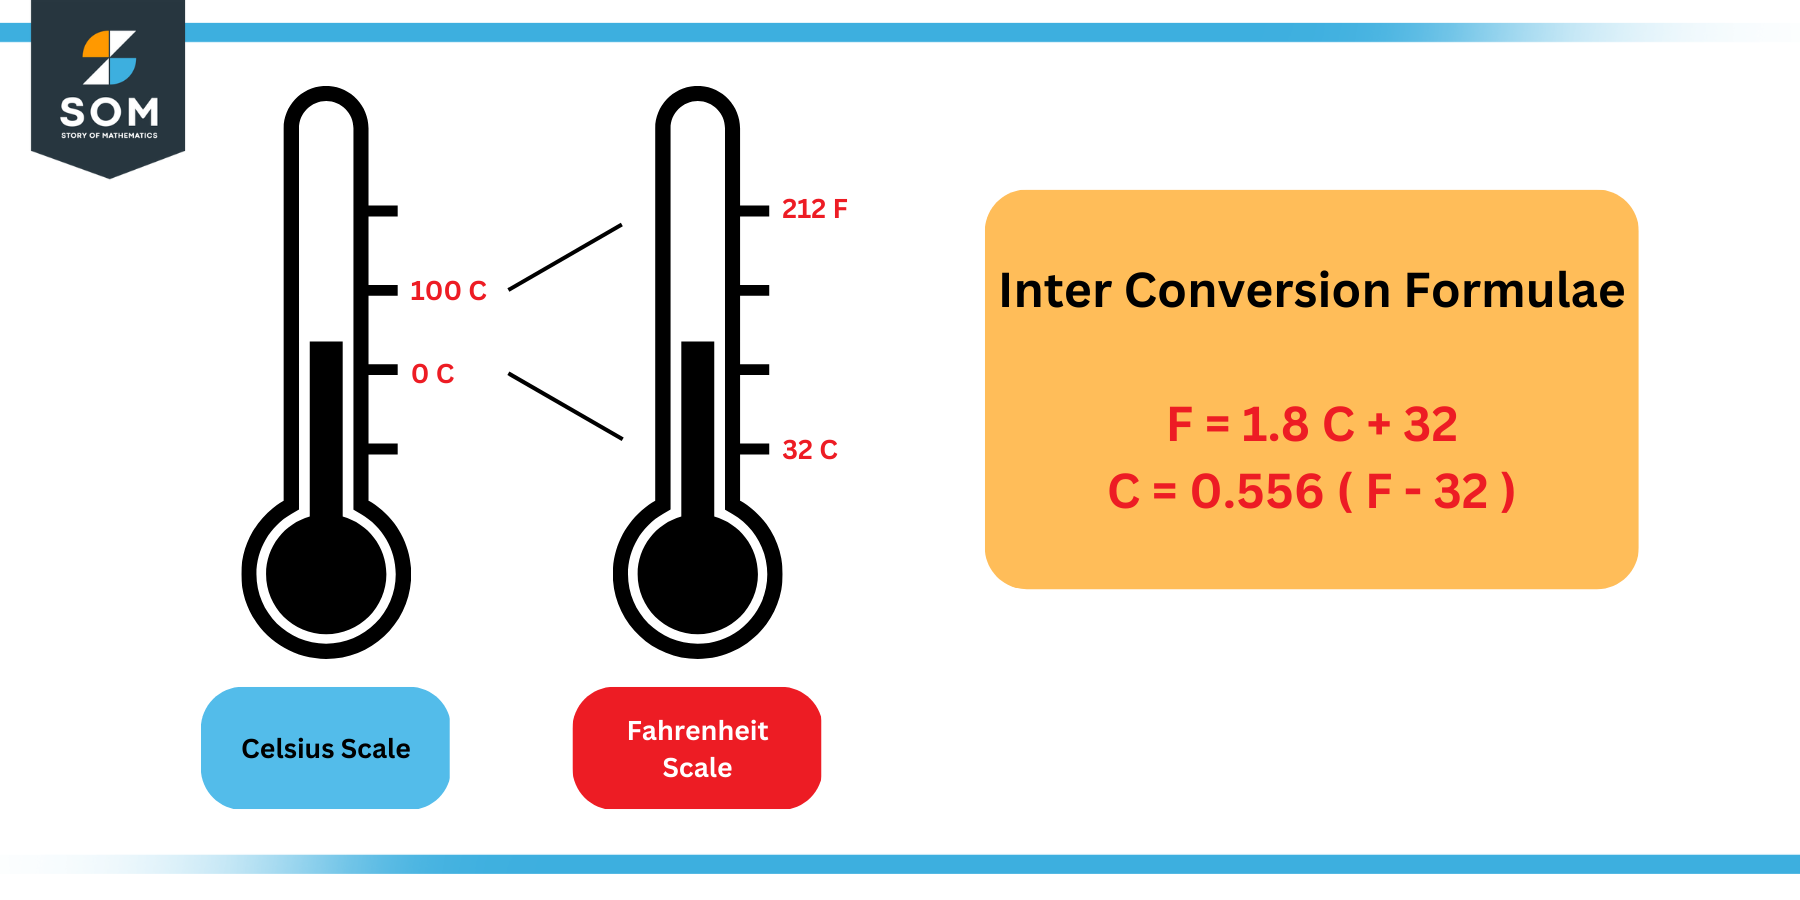 Inter conversion between Fahrenheit and Celsius Scales